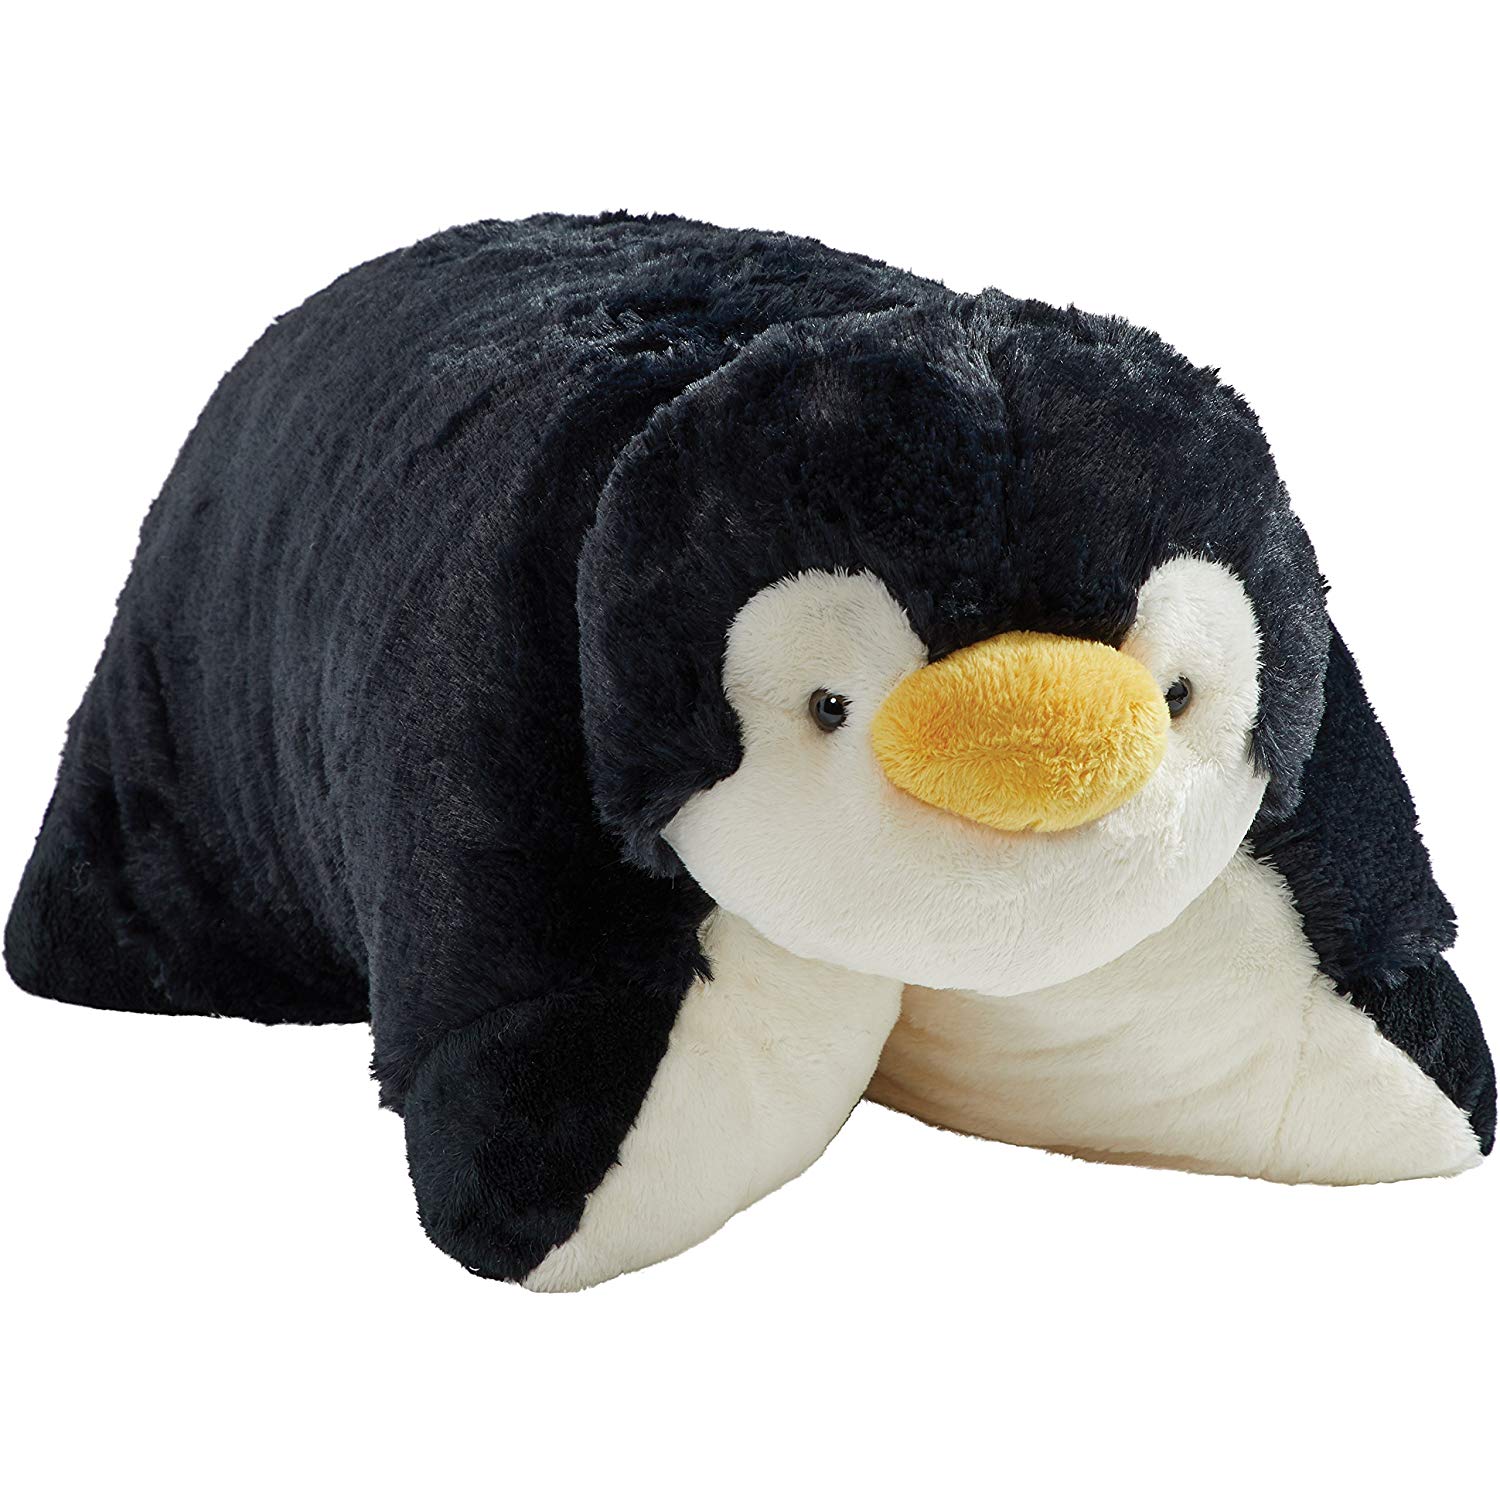 My Pillow Pets Large 18 Animal Pets Multi-Colored - image 2 of 2